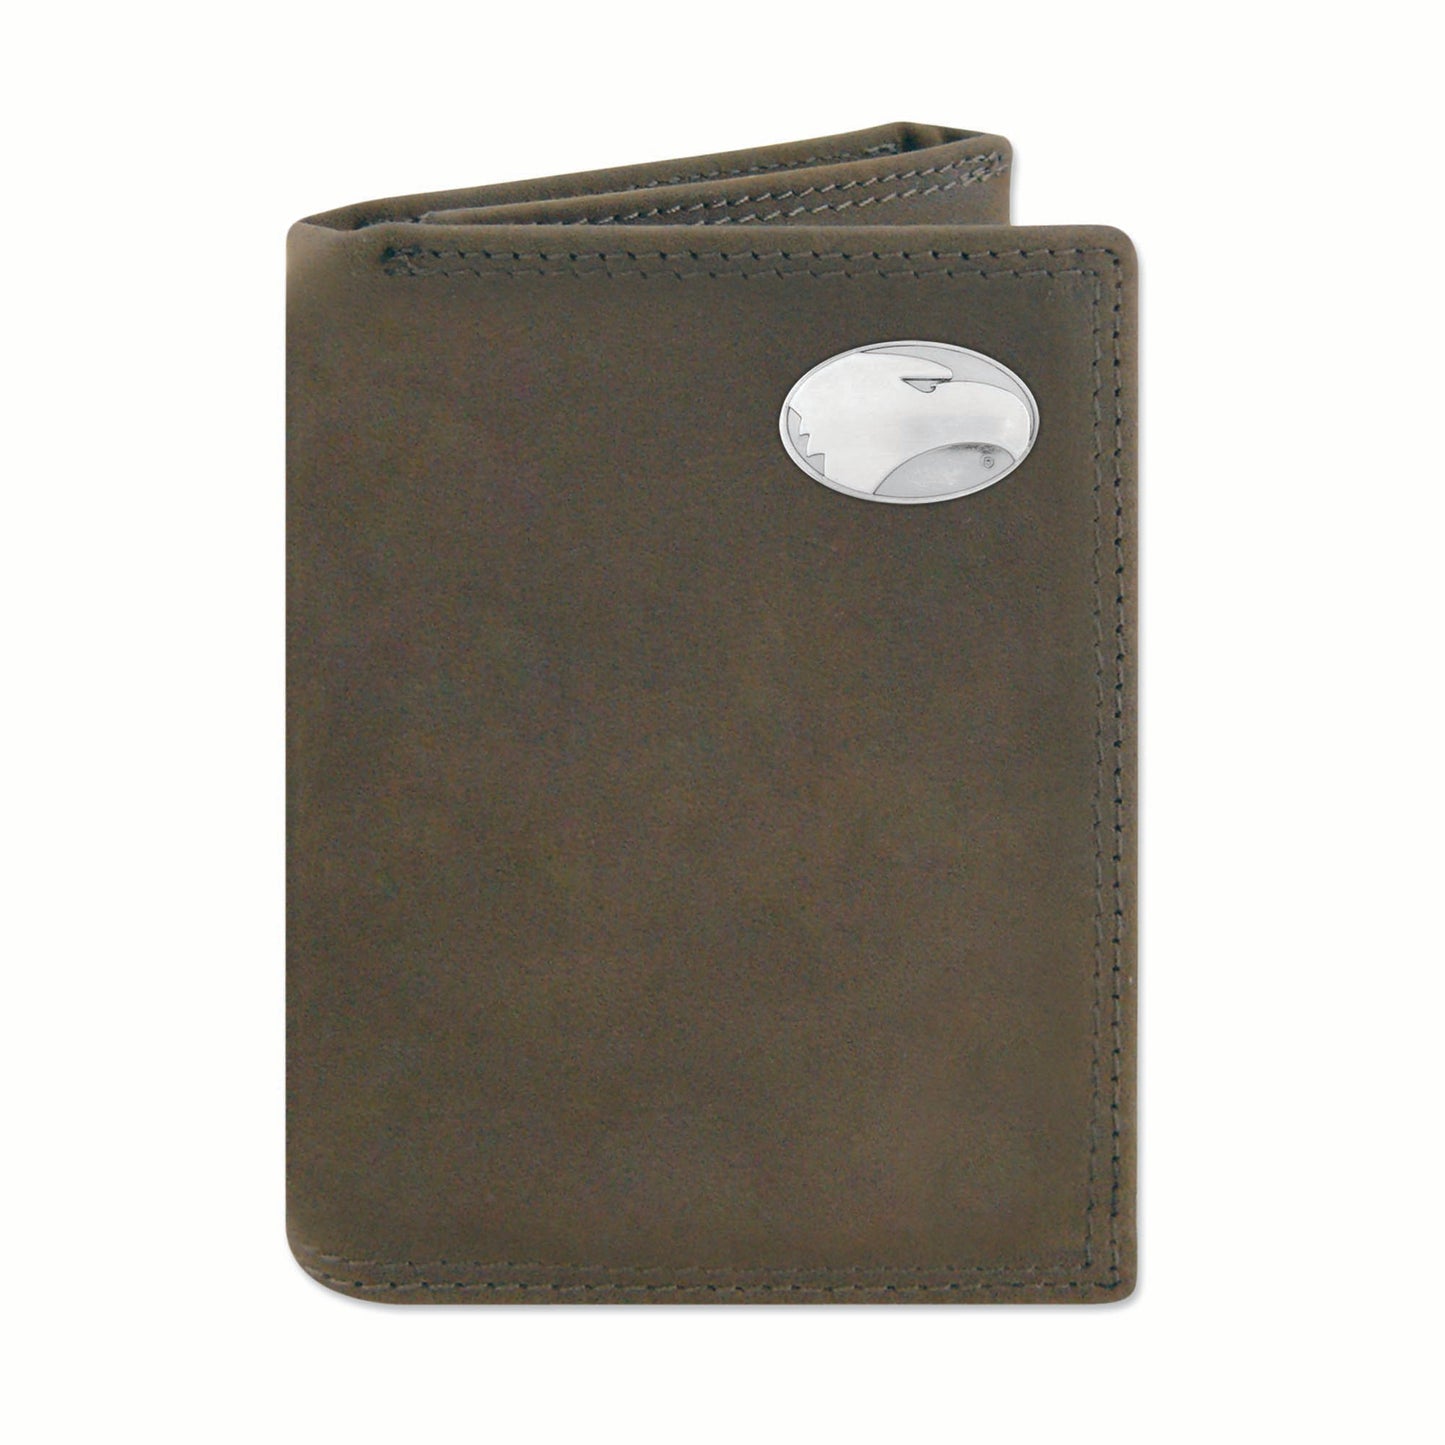 Trifold Wallet - Leather with Metal Concho